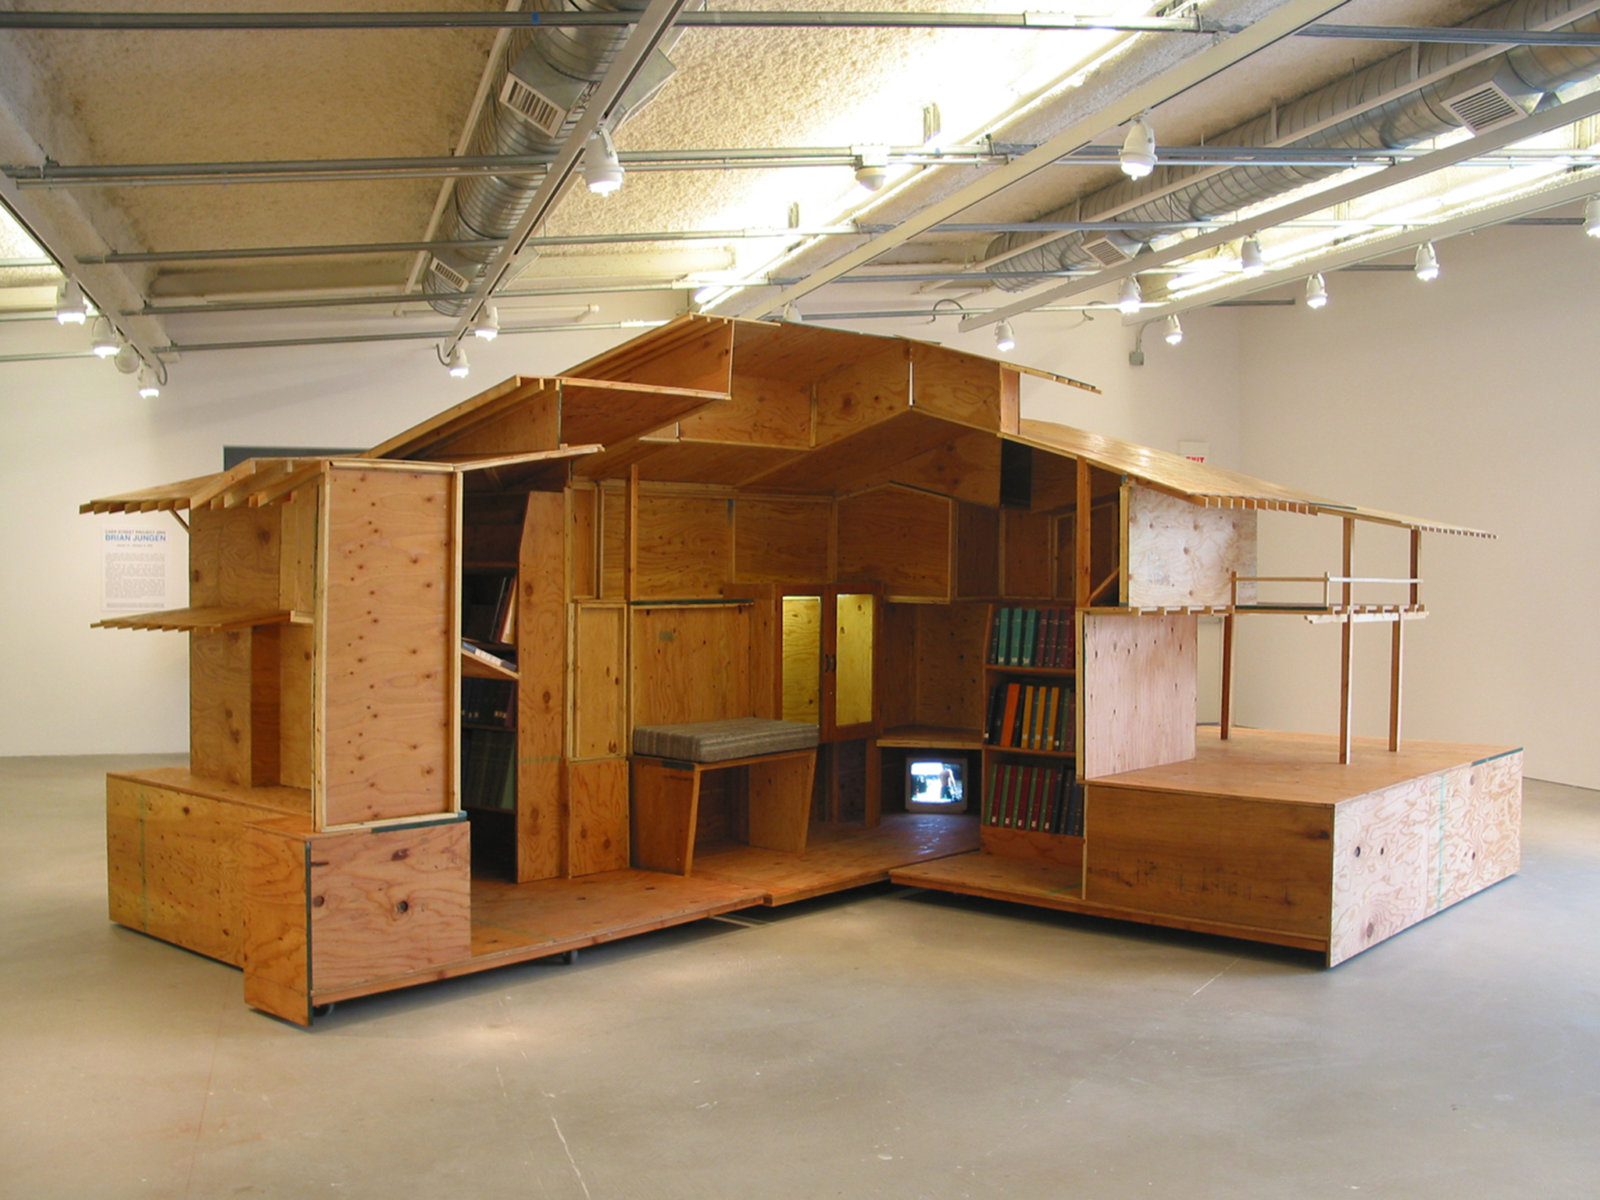 Brian Jungen, Arts and Crafts Book Depository / Capp Street Project 2004, 2004, architectural model (scale of Greene and Greene's Gamble House) made of plywood sectioned into 4 quadrants, locking castors, bookshelves, 2 framed glass cabinets with electrical source and lighting unit, hand-made fabric pillows for seating benches, video monitor, ongoing accumulation of library inventory of magazines, journals, books and videos, 108 x 192 x 252 in. (274 x 488 x 640 cm)